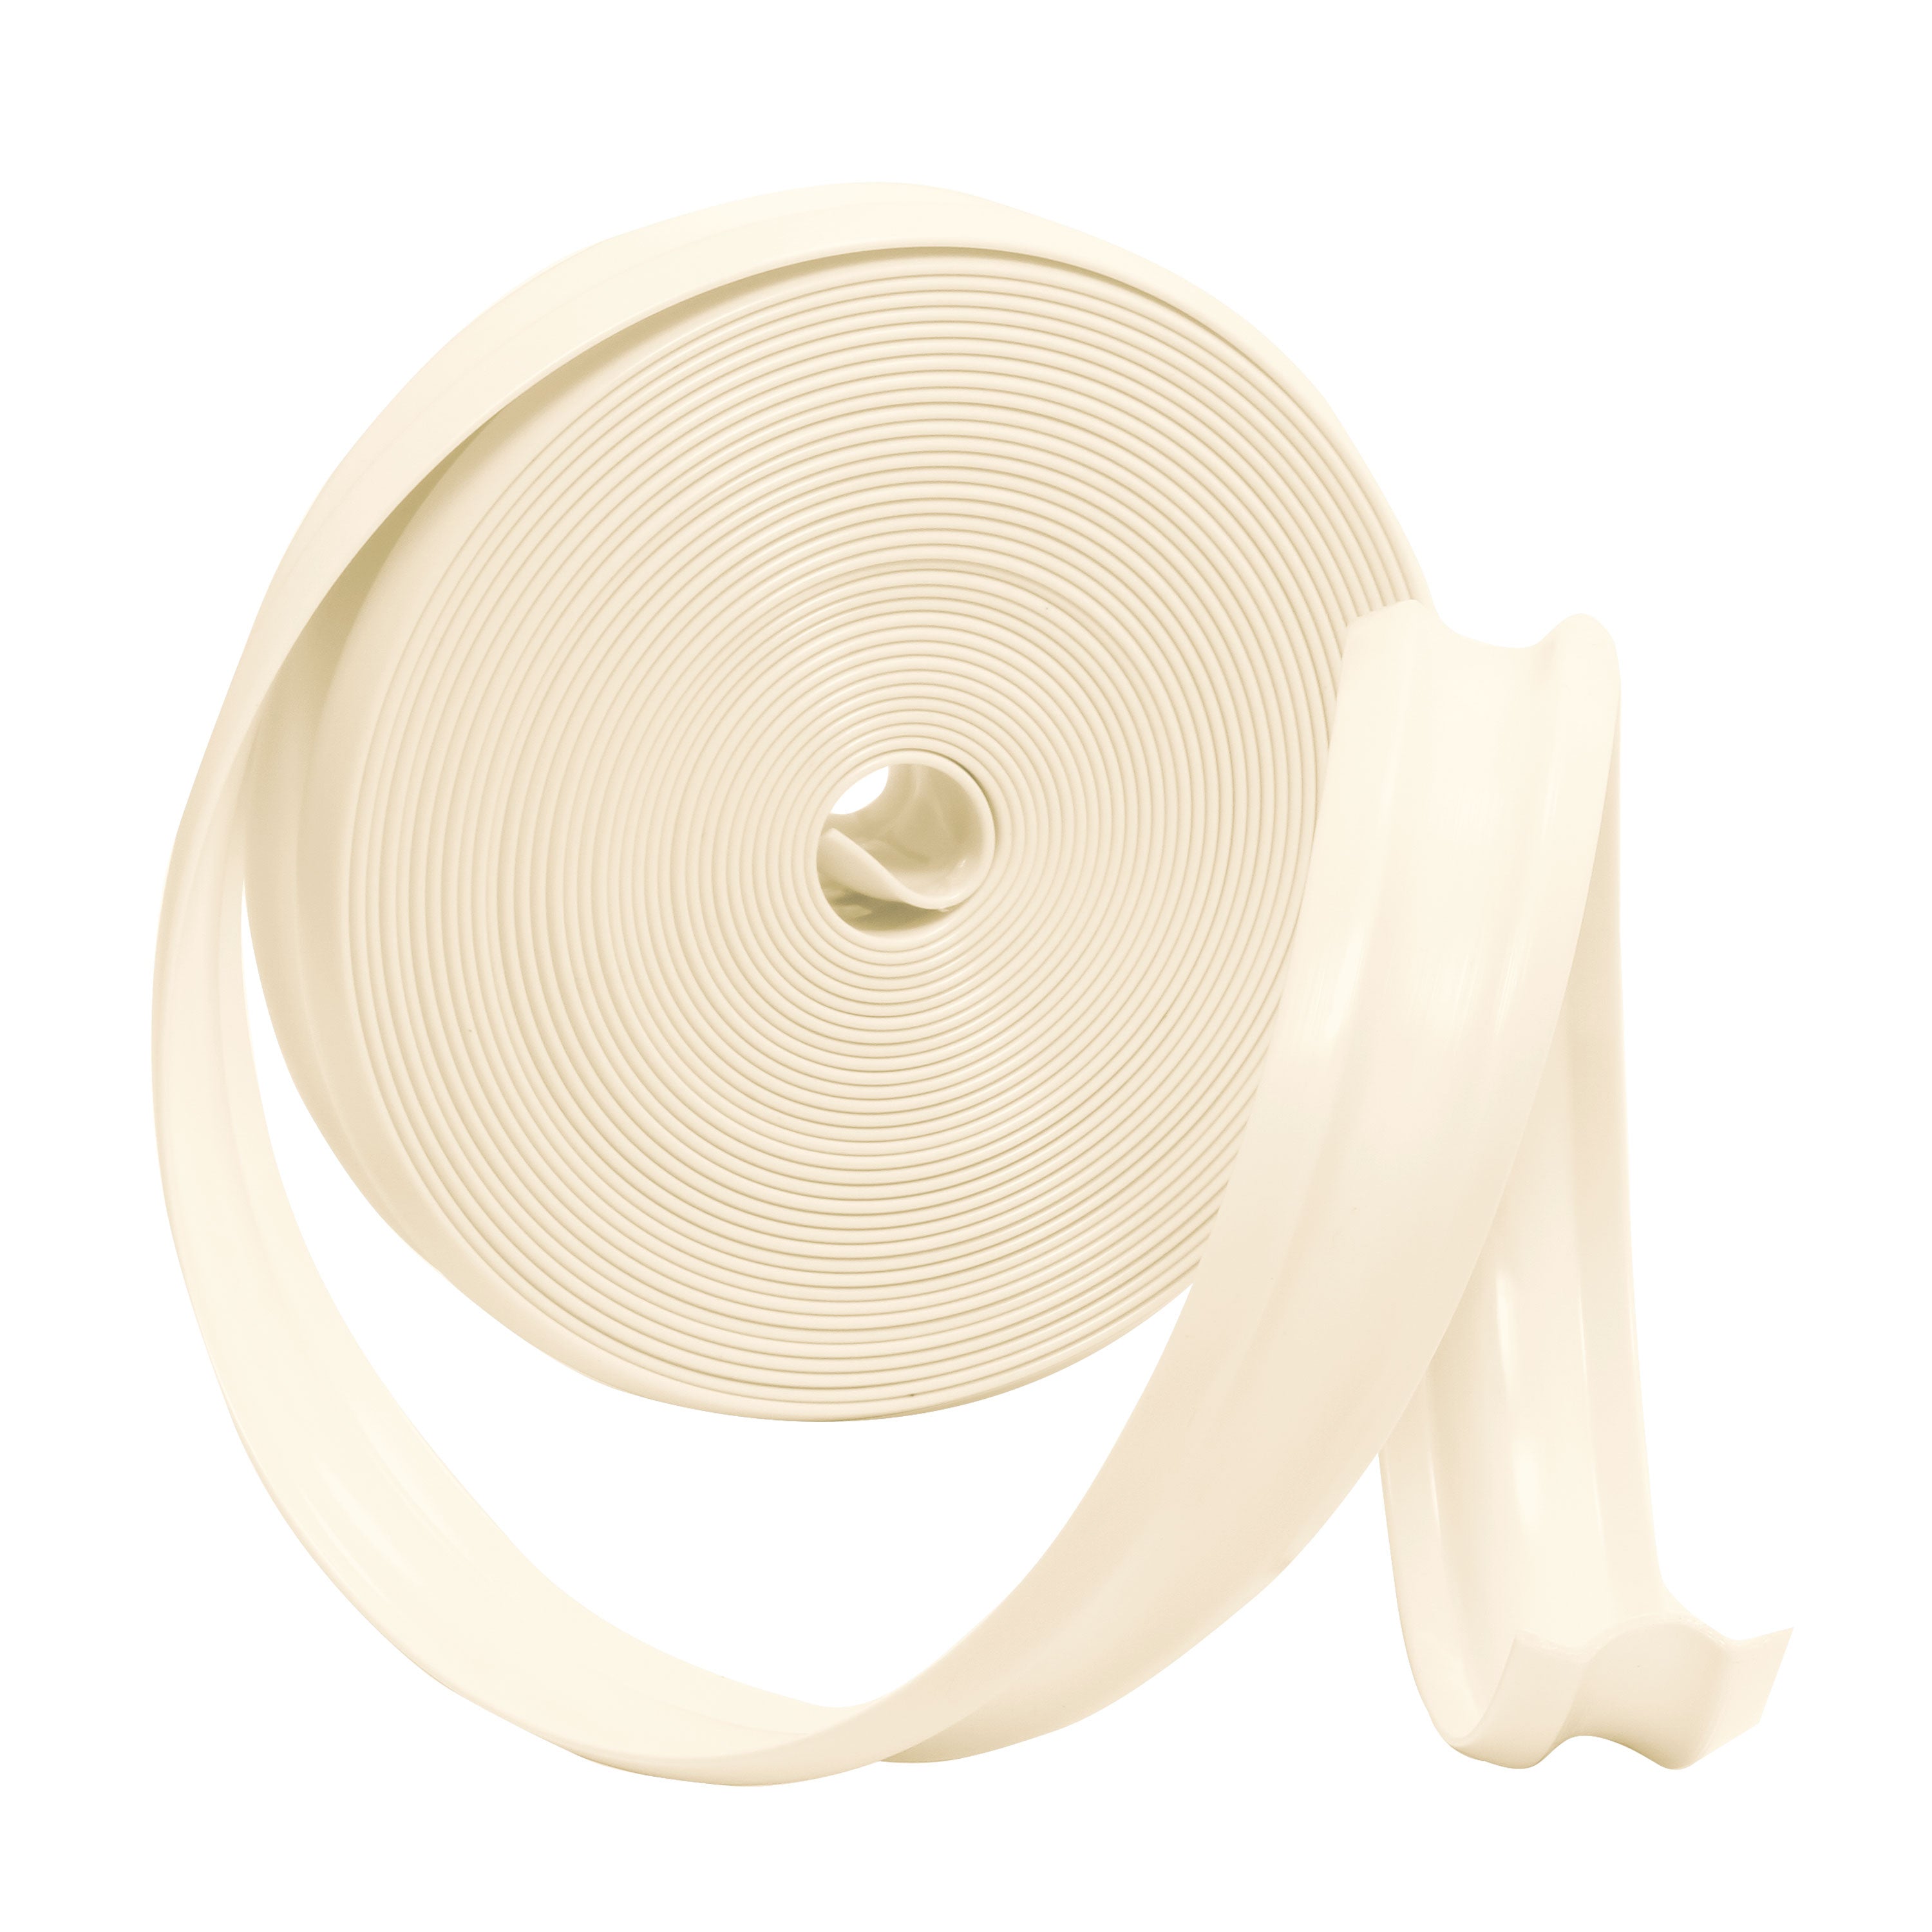 Camco 25222 1" x 100' Vinyl Insert - Colonial White